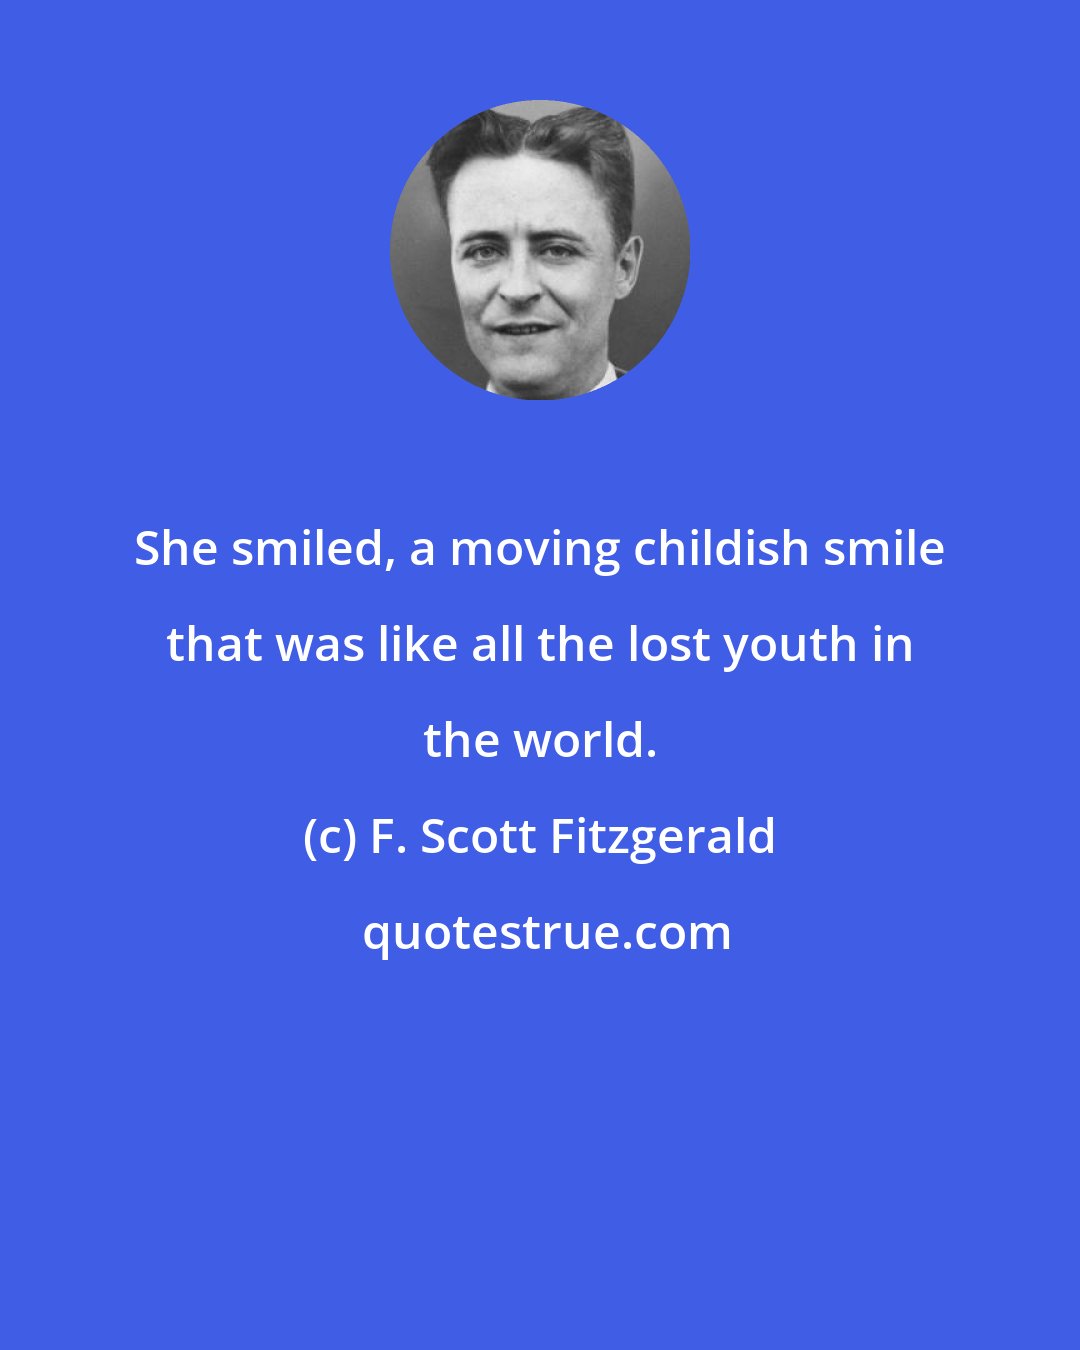 F. Scott Fitzgerald: She smiled, a moving childish smile that was like all the lost youth in the world.